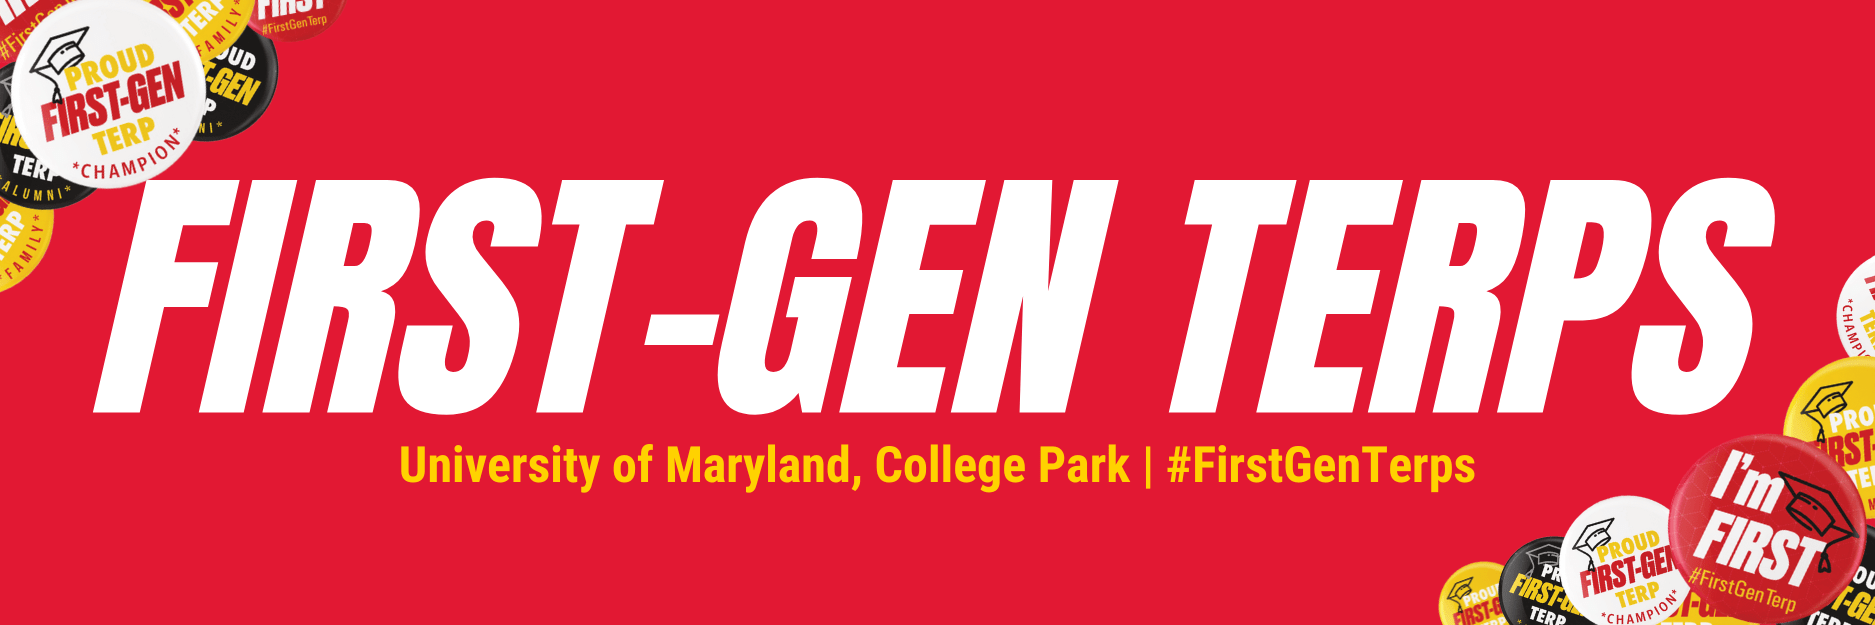 Red banner reading First-Gen Terps. Images of first-gen pride buttons frame the image with messages, I'm First; Proud First-Gen Terp Champion; Proud First-Gen Terps Alumni; Proud First-Gen Terp Family